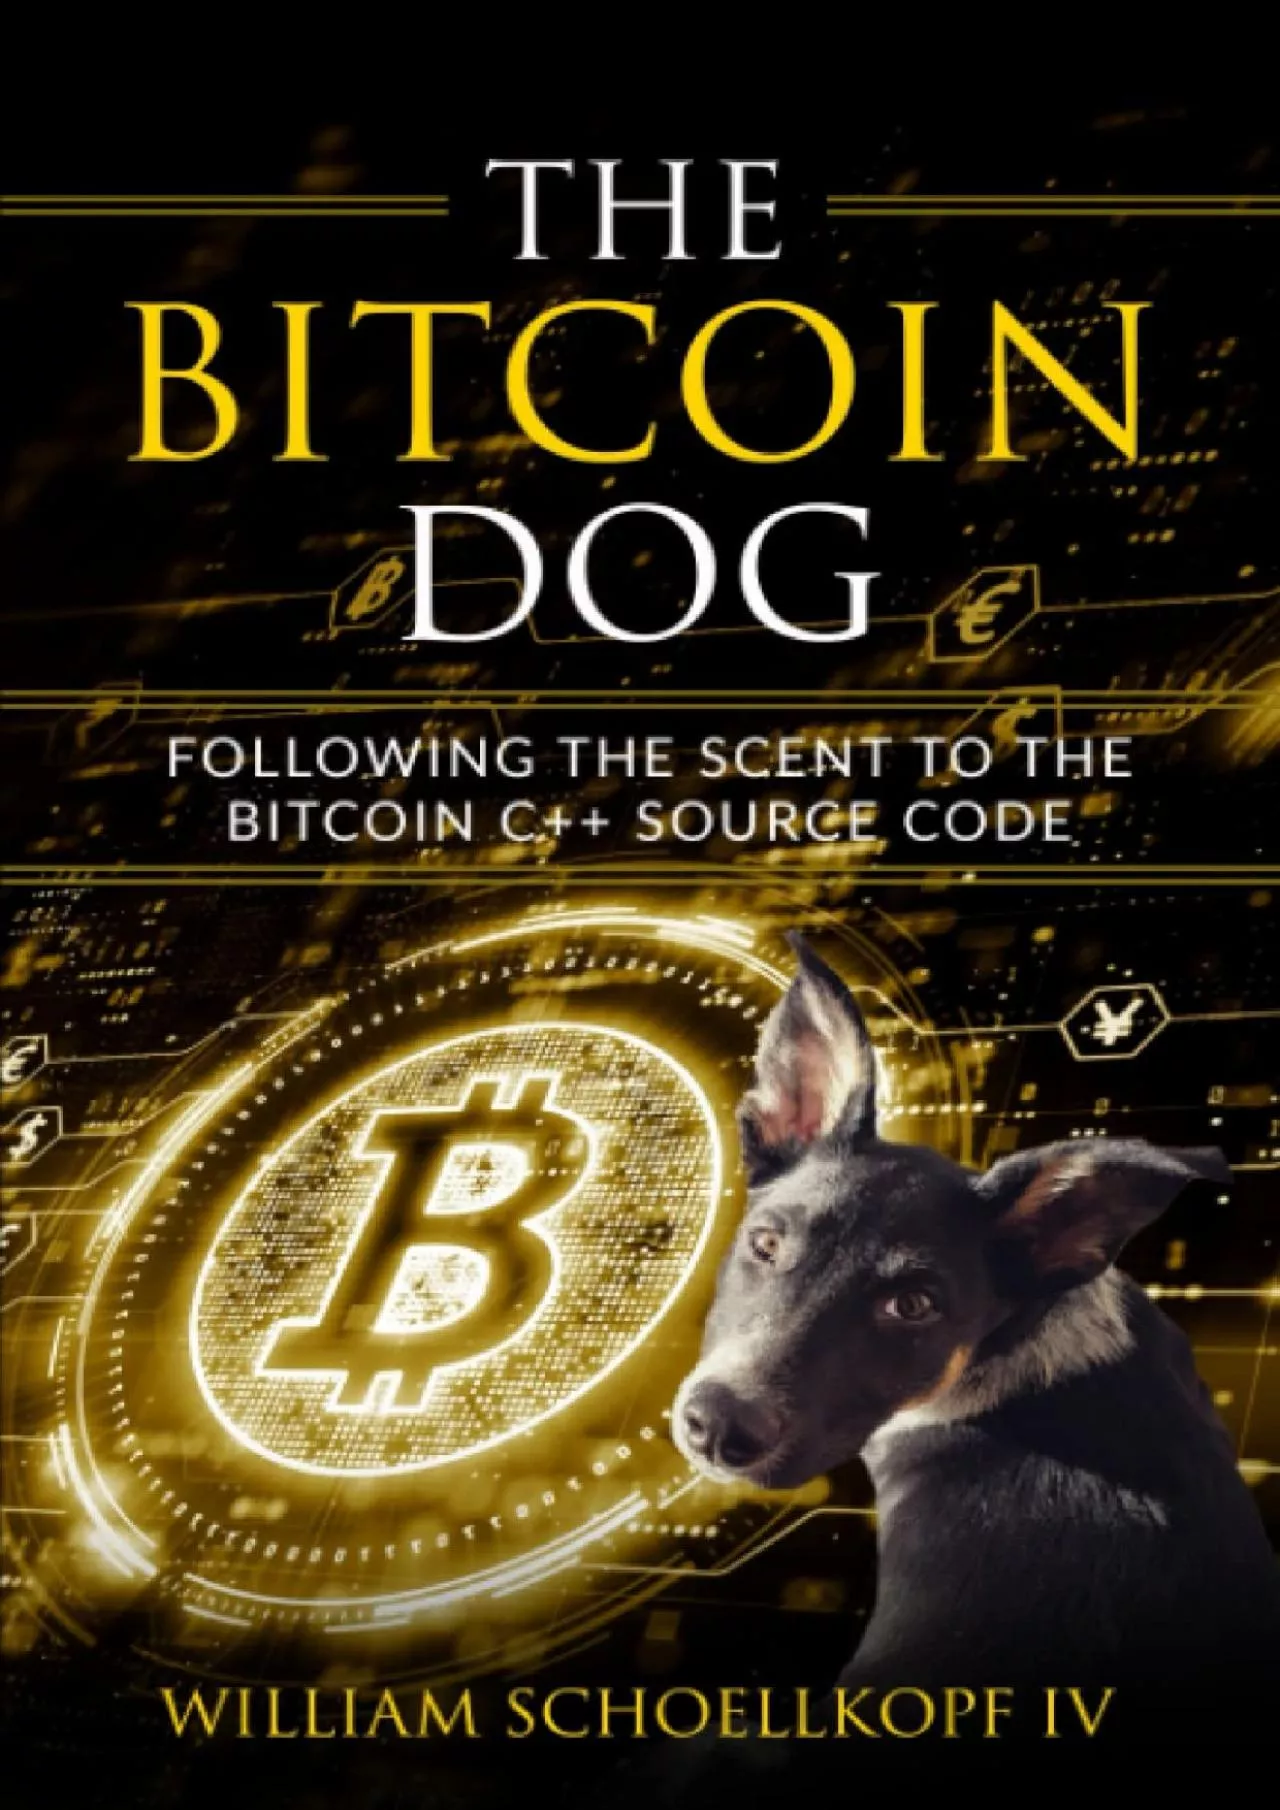 [READING BOOK]-The Bitcoin Dog: Following the Scent to the Bitcoin C++ Source Code